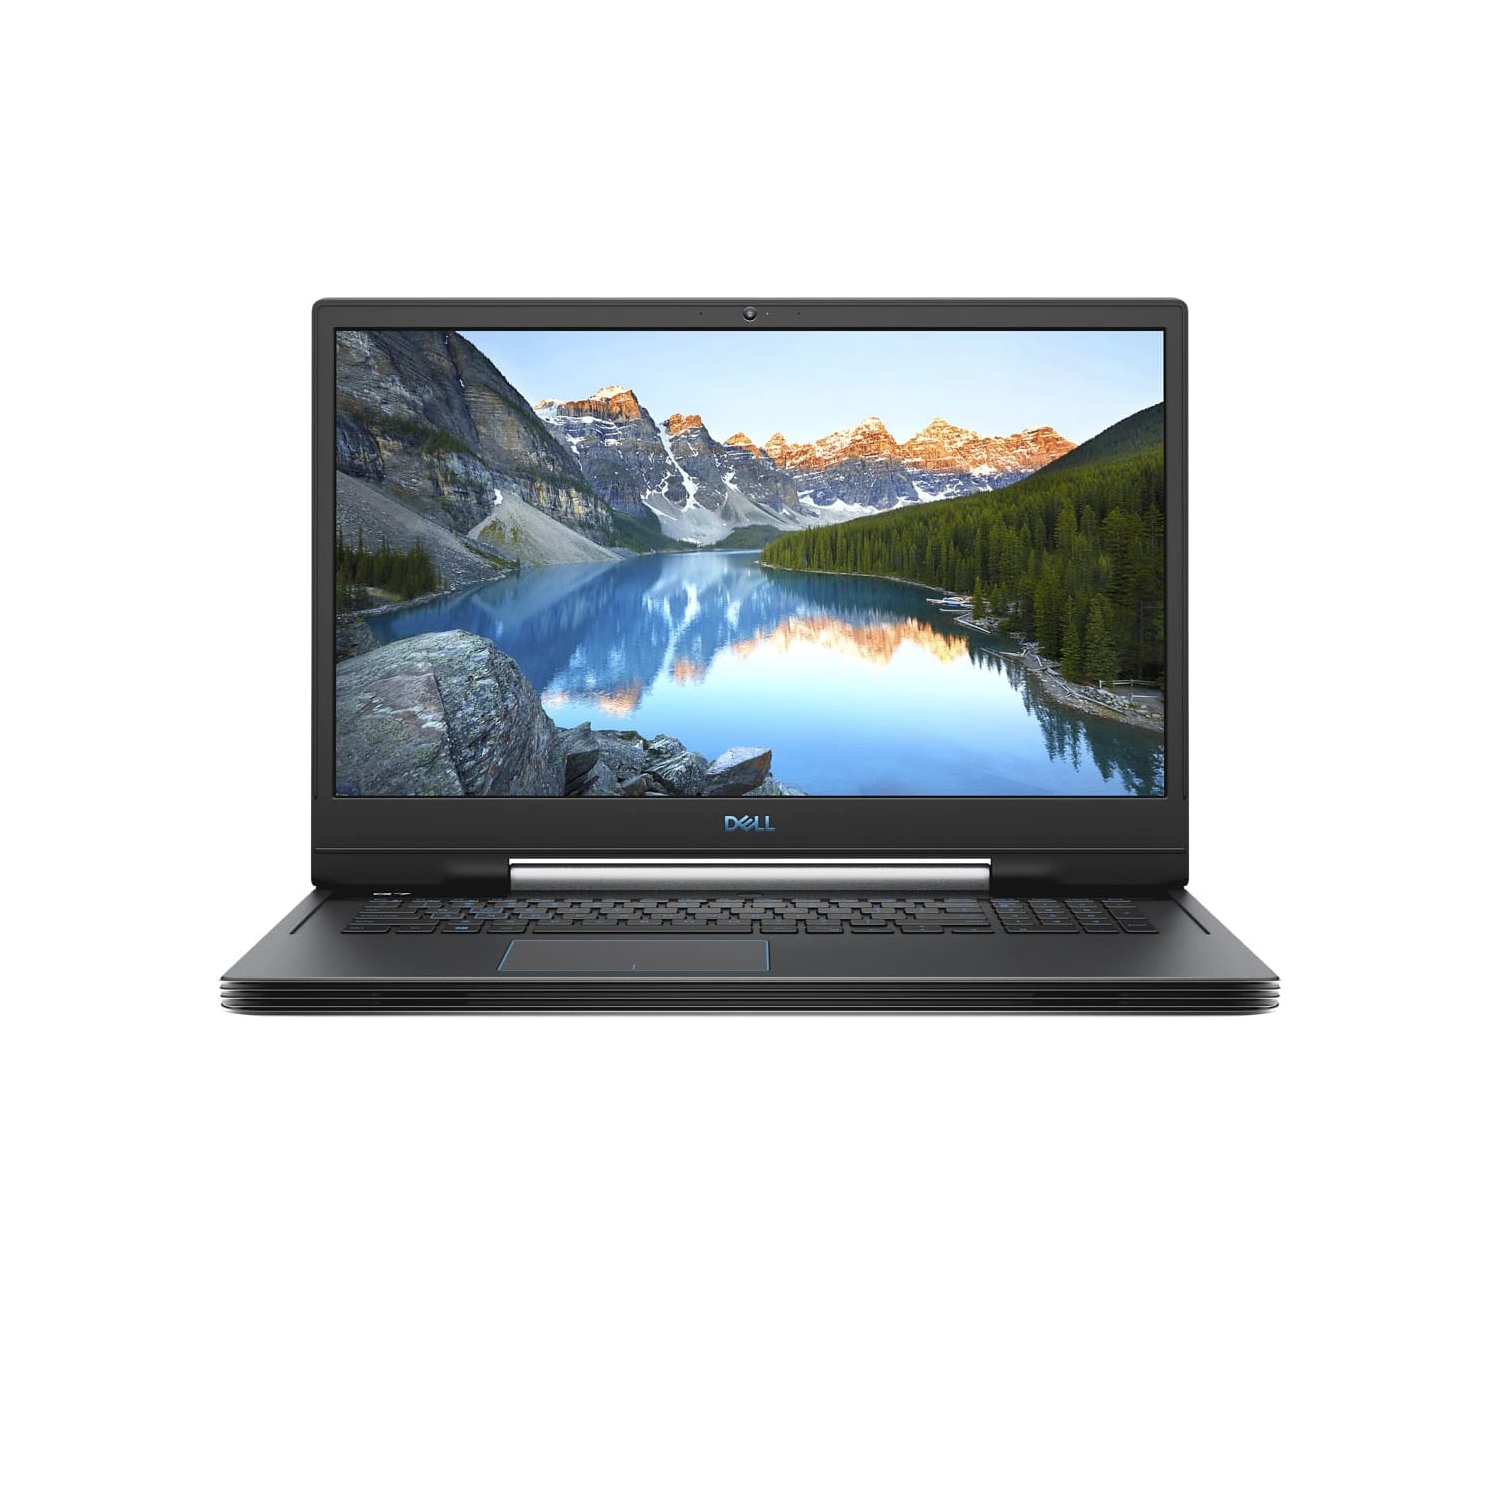 Refurbished (Excellent) – Dell G7 7790 Gaming Laptop (2019) | 17.3" FHD | Core i5 - 512GB SSD - 16GB RAM - 1660 Ti | 4 Cores @ 4.1 GHz - 6GB GDDR6